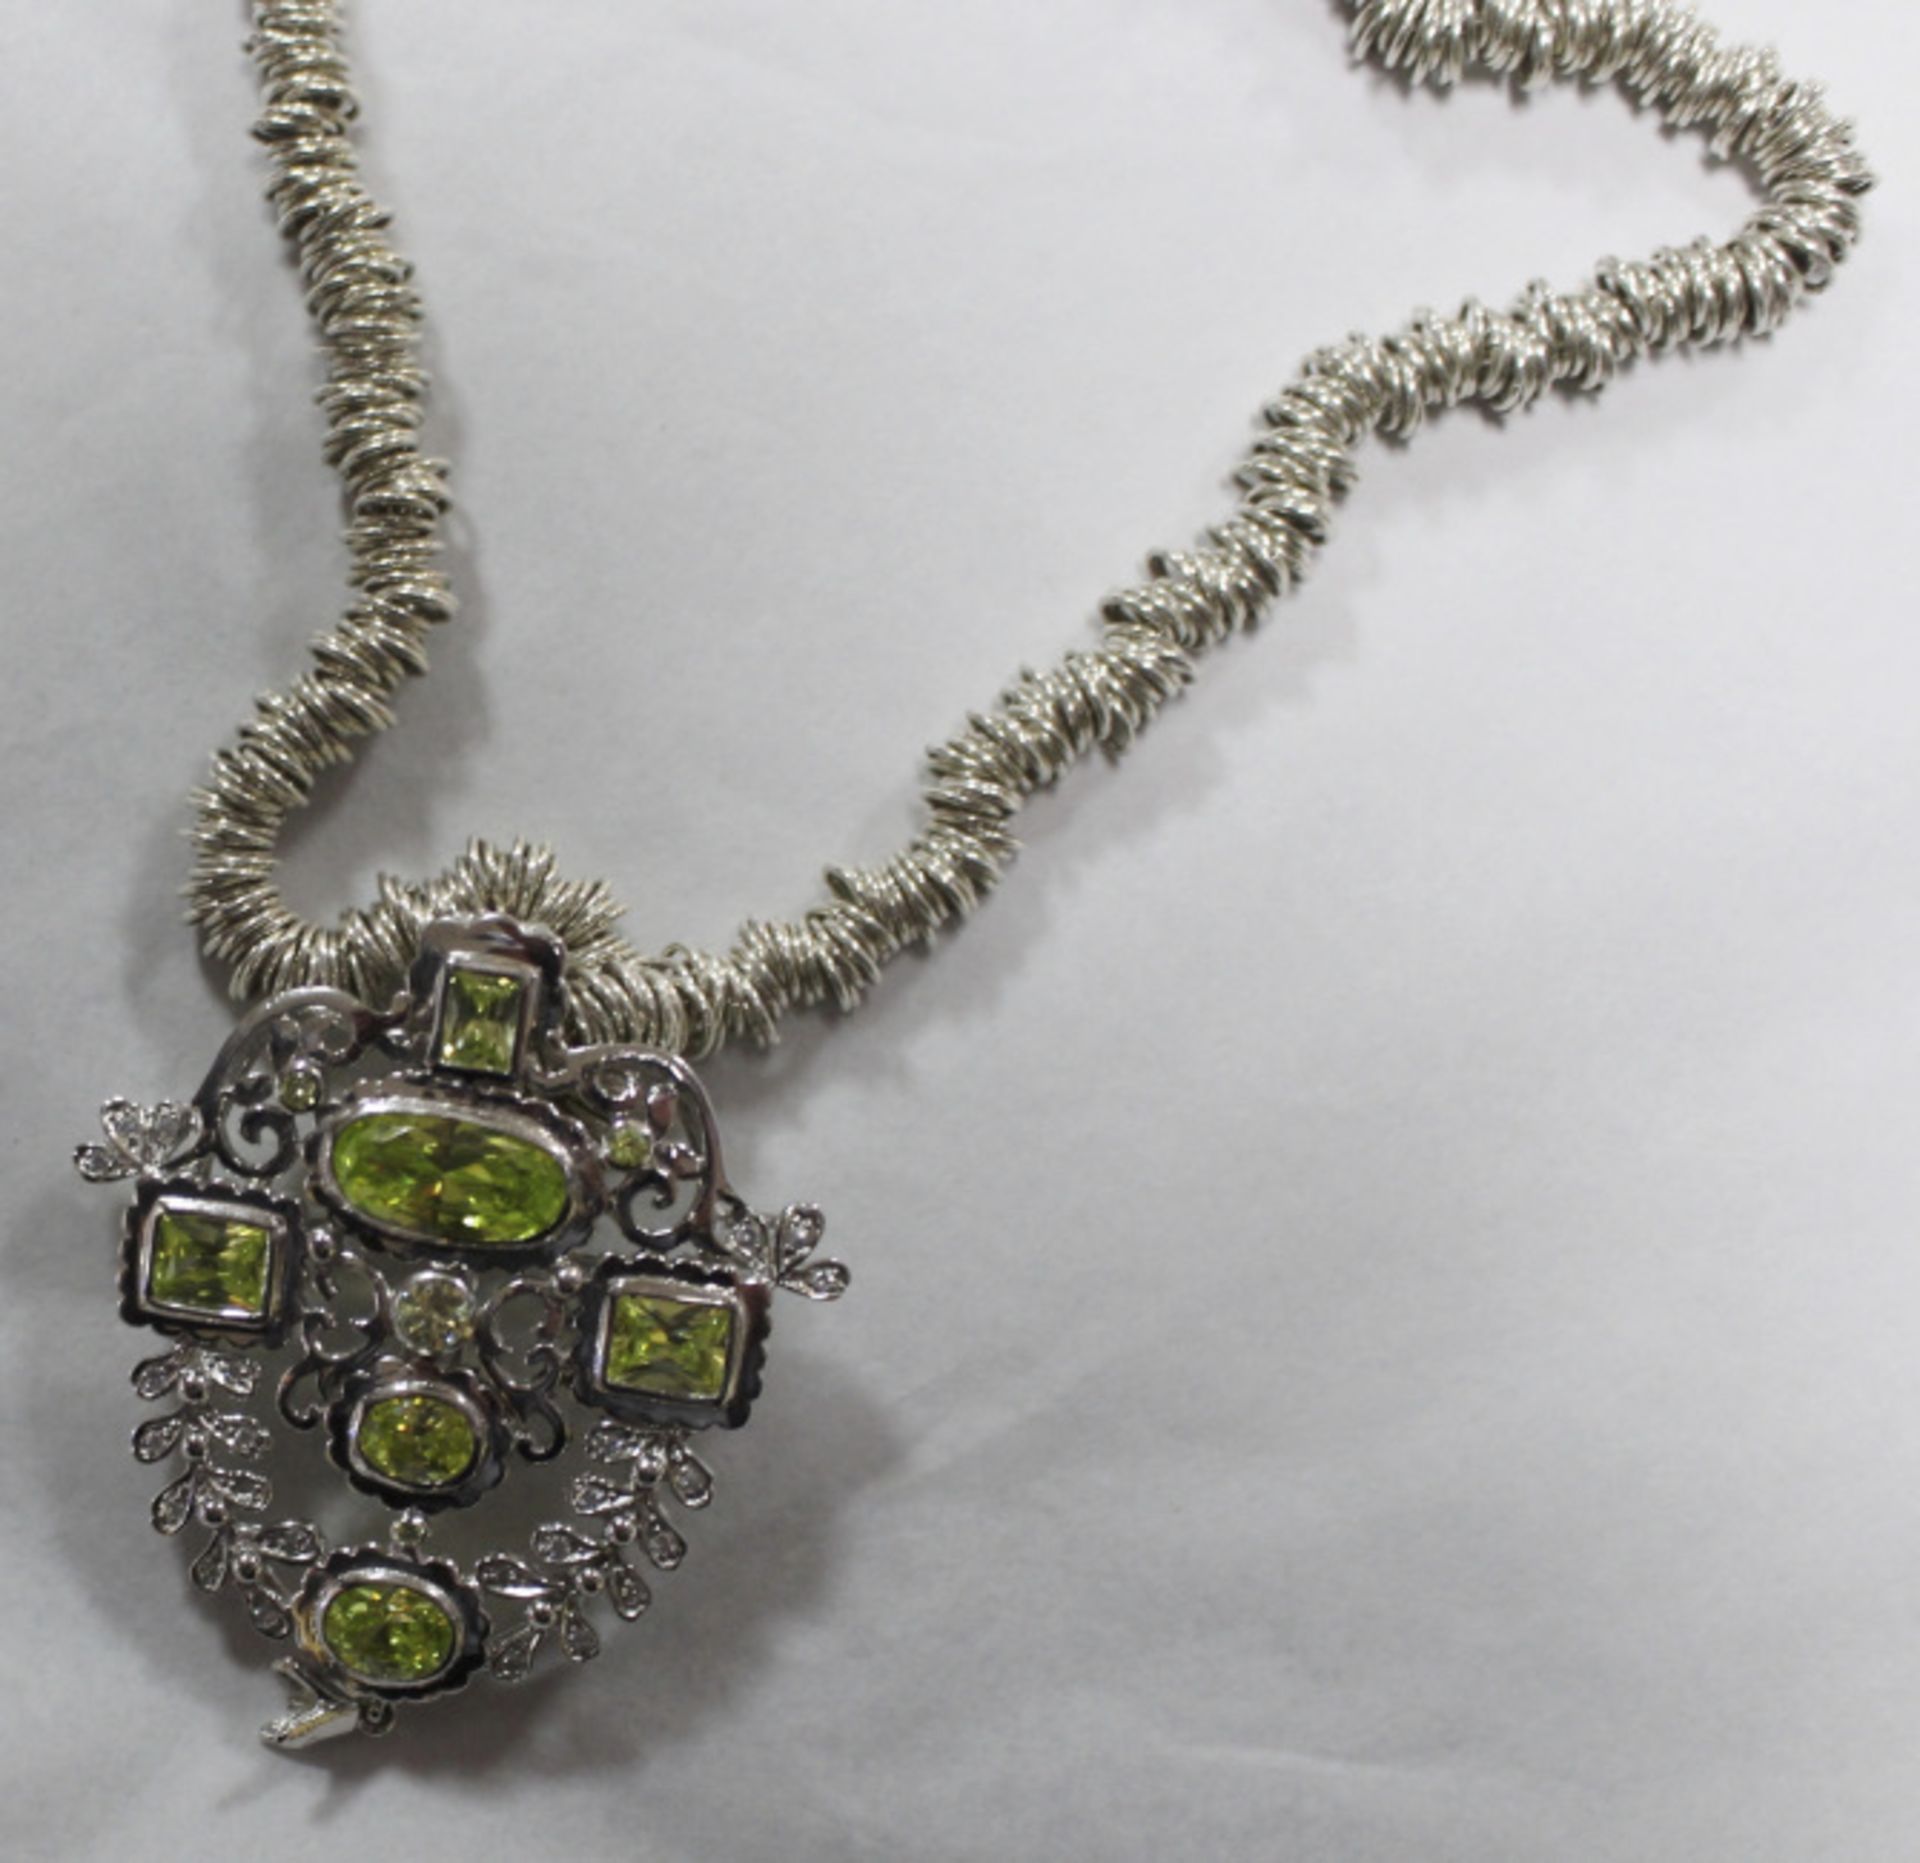 Contemporary Heavy Sterling Silver Peridot Set Necklace - Image 2 of 5